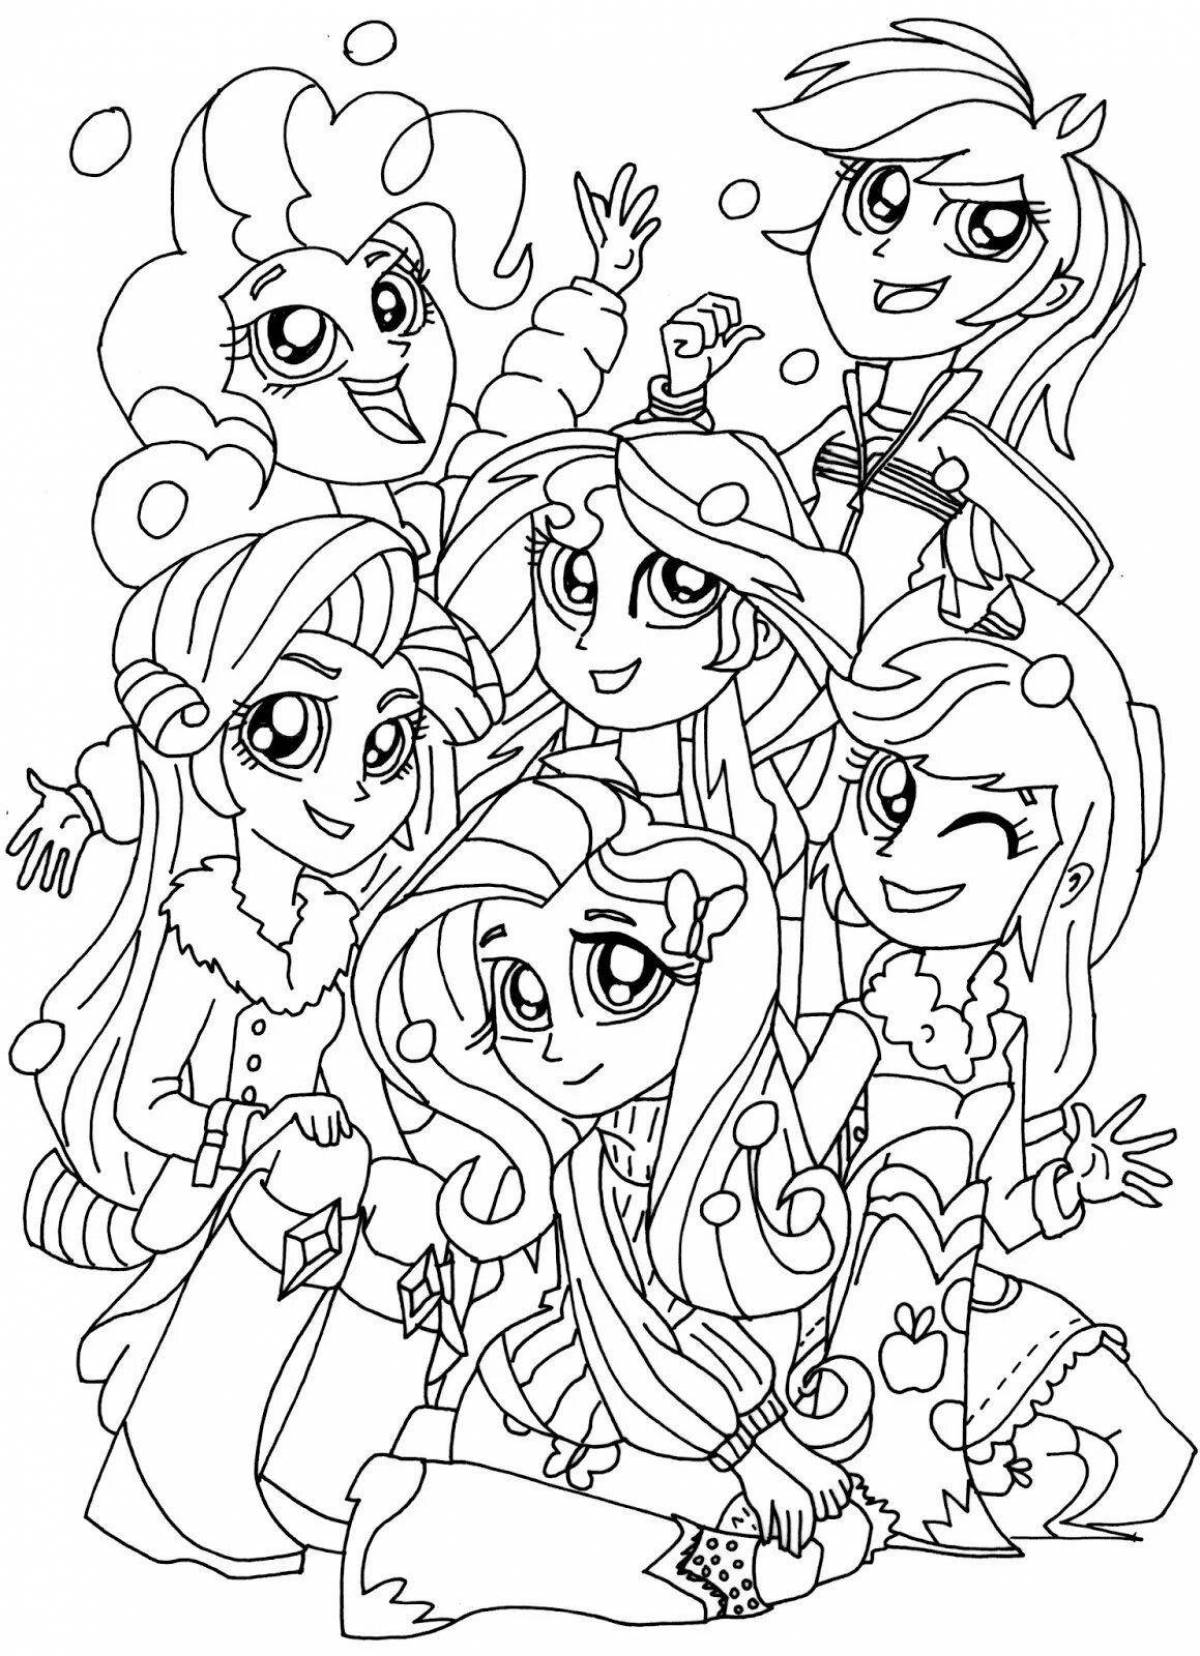 Terrific coloring pony equestria girls my little